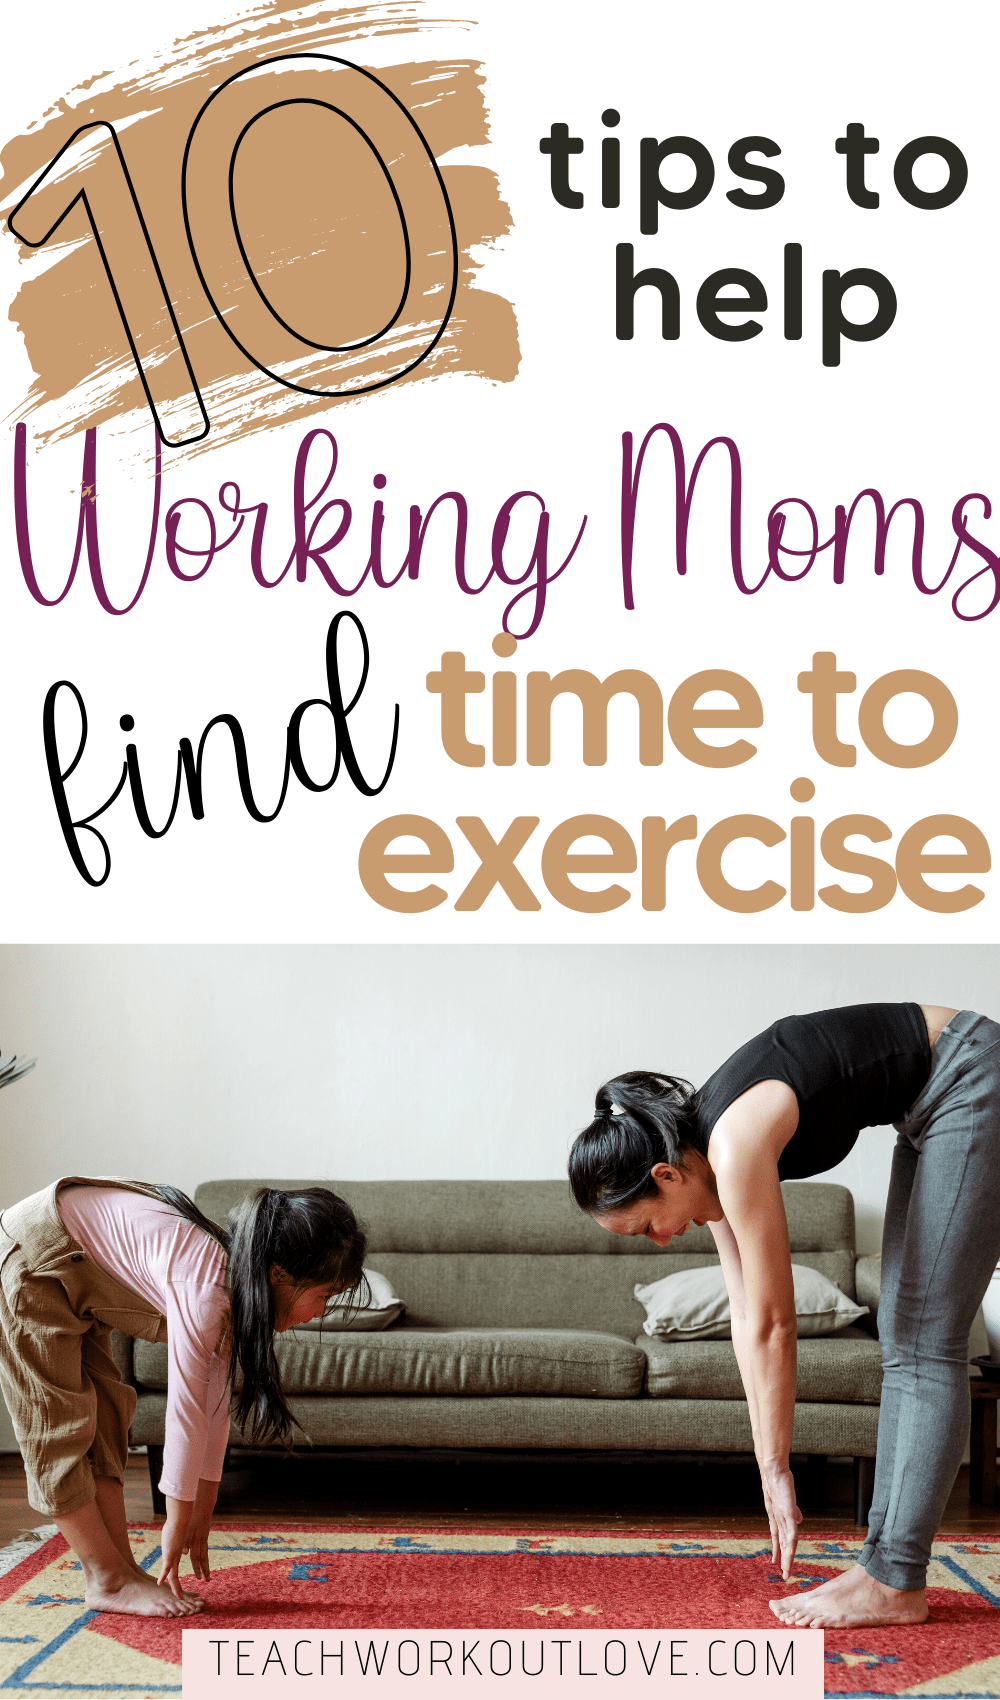 Most moms need to work to help support their families and fitting in time to exercise is hard. Read 10 tips to help you find extra time daily to exercise.